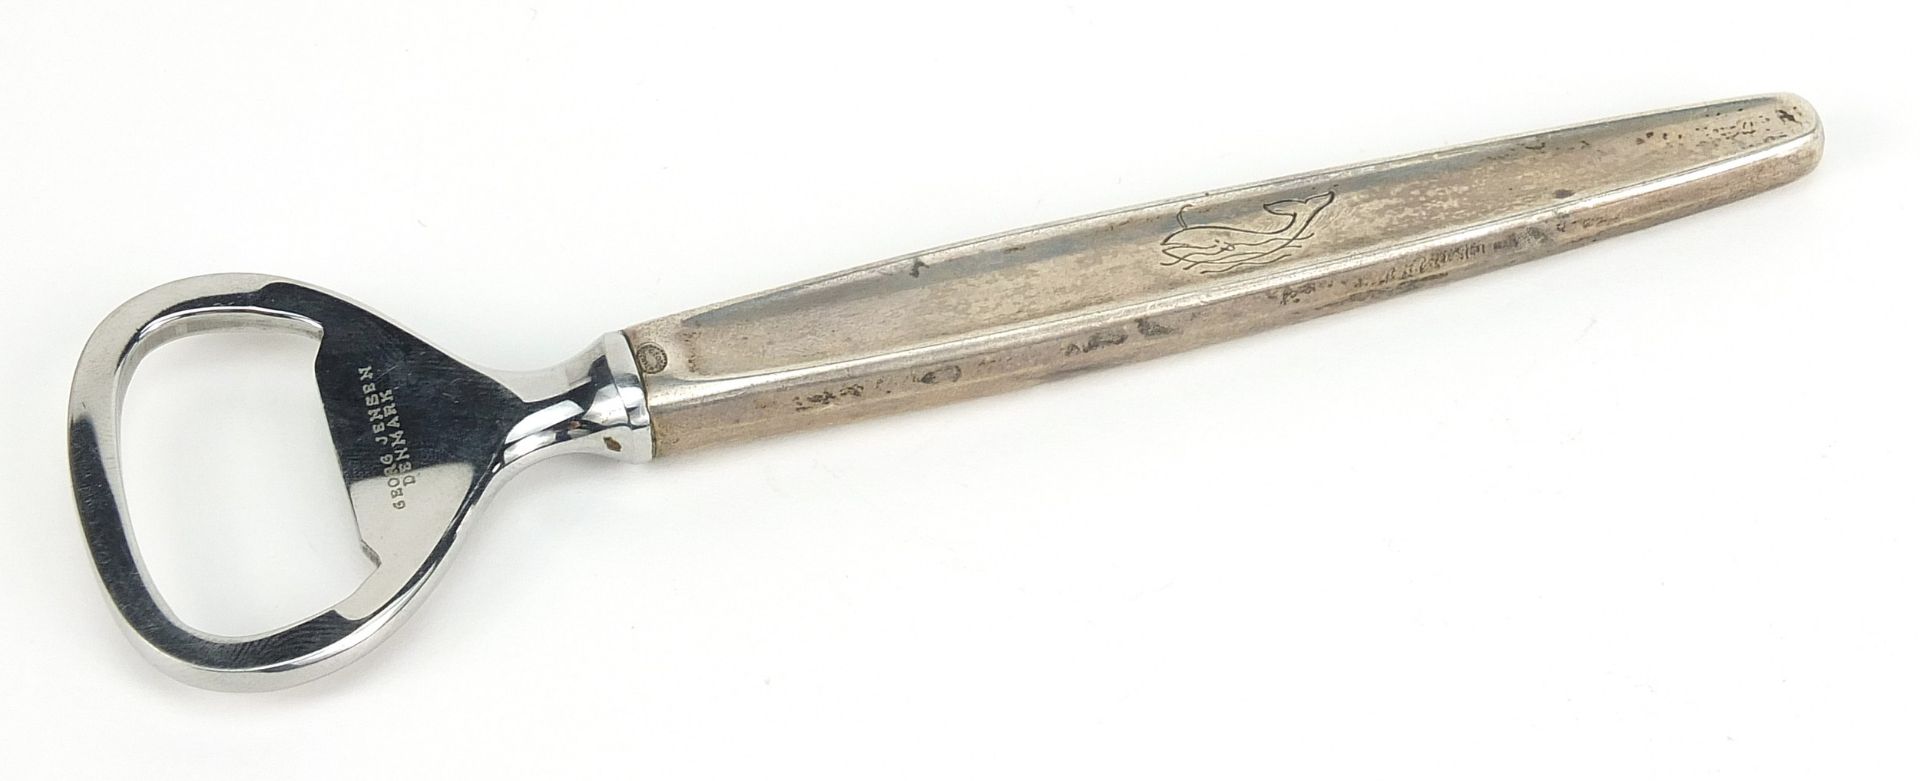 Georg Jensen, Danish sterling silver handled bottle opener engraved with a whale, 14cm in length, - Image 2 of 6